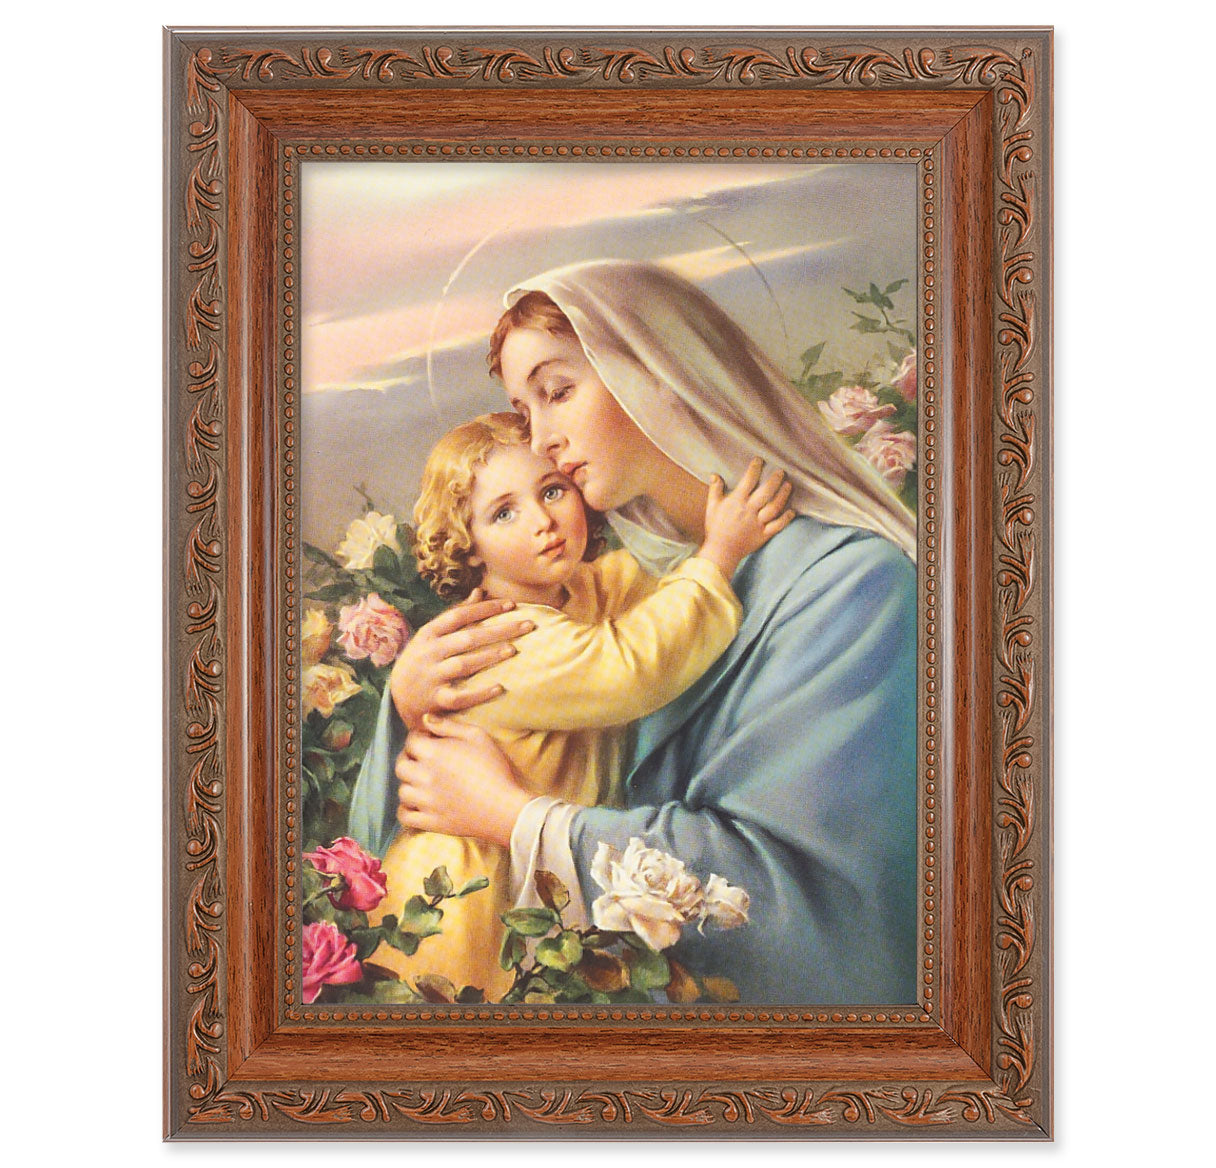 Madonna and Child Picture Framed Wall Art Decor Medium, Antiqued Dark Mahogany Finished Frame with Acanthus-Leaf Detail